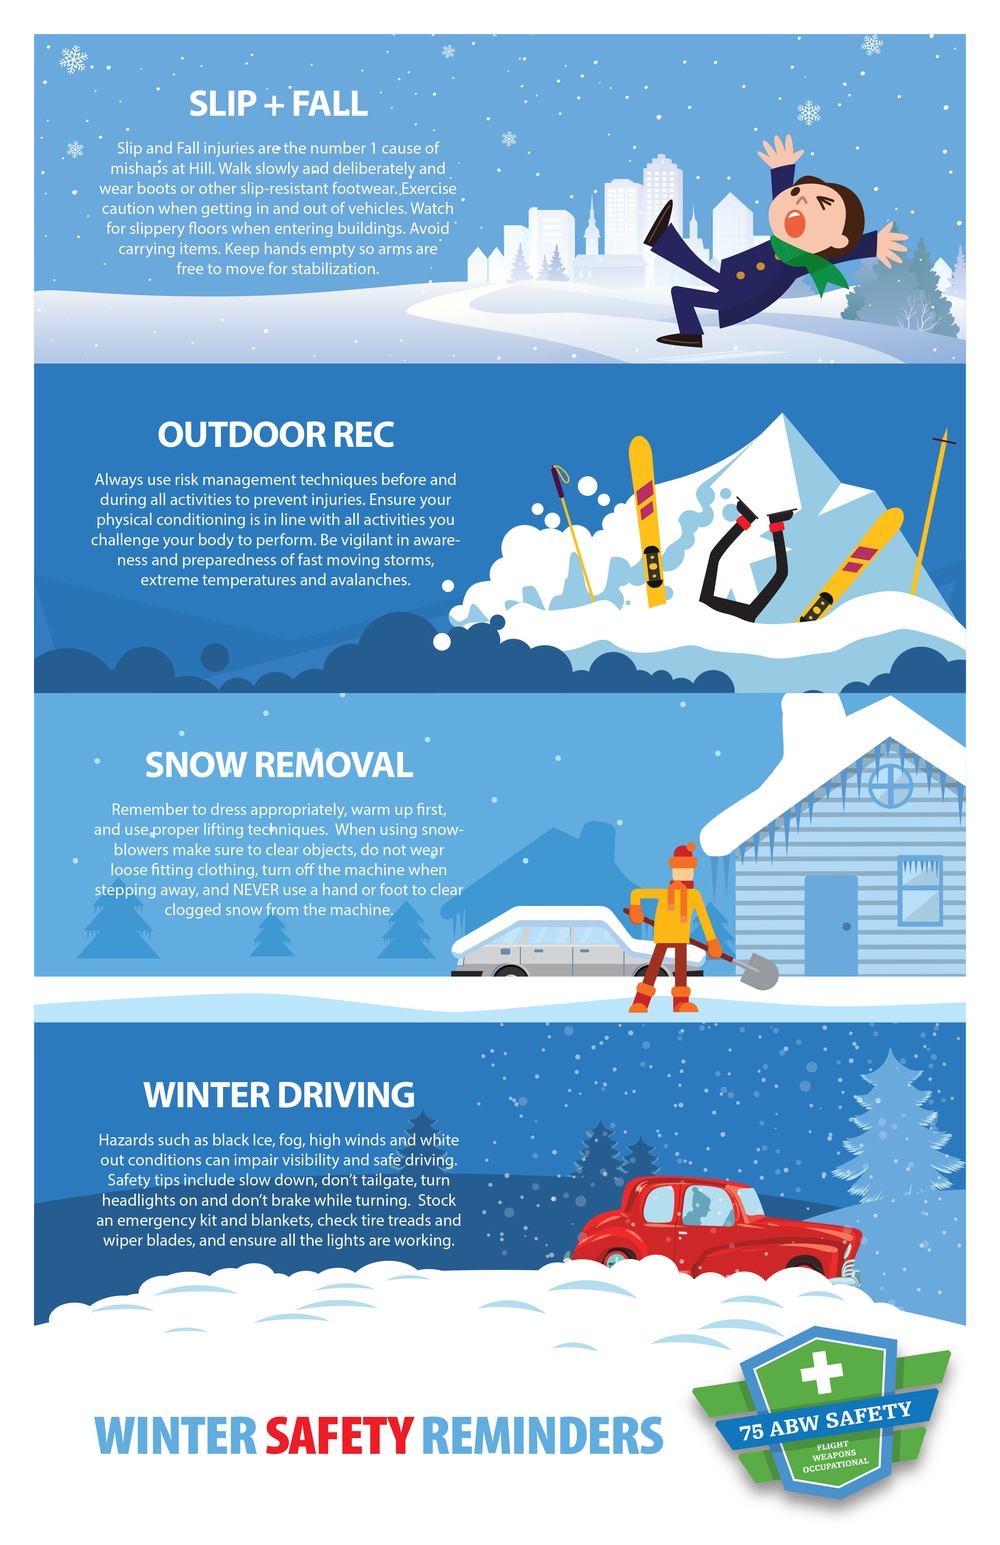 75 ABW Safety - Winter Safety poster 11” x 17”